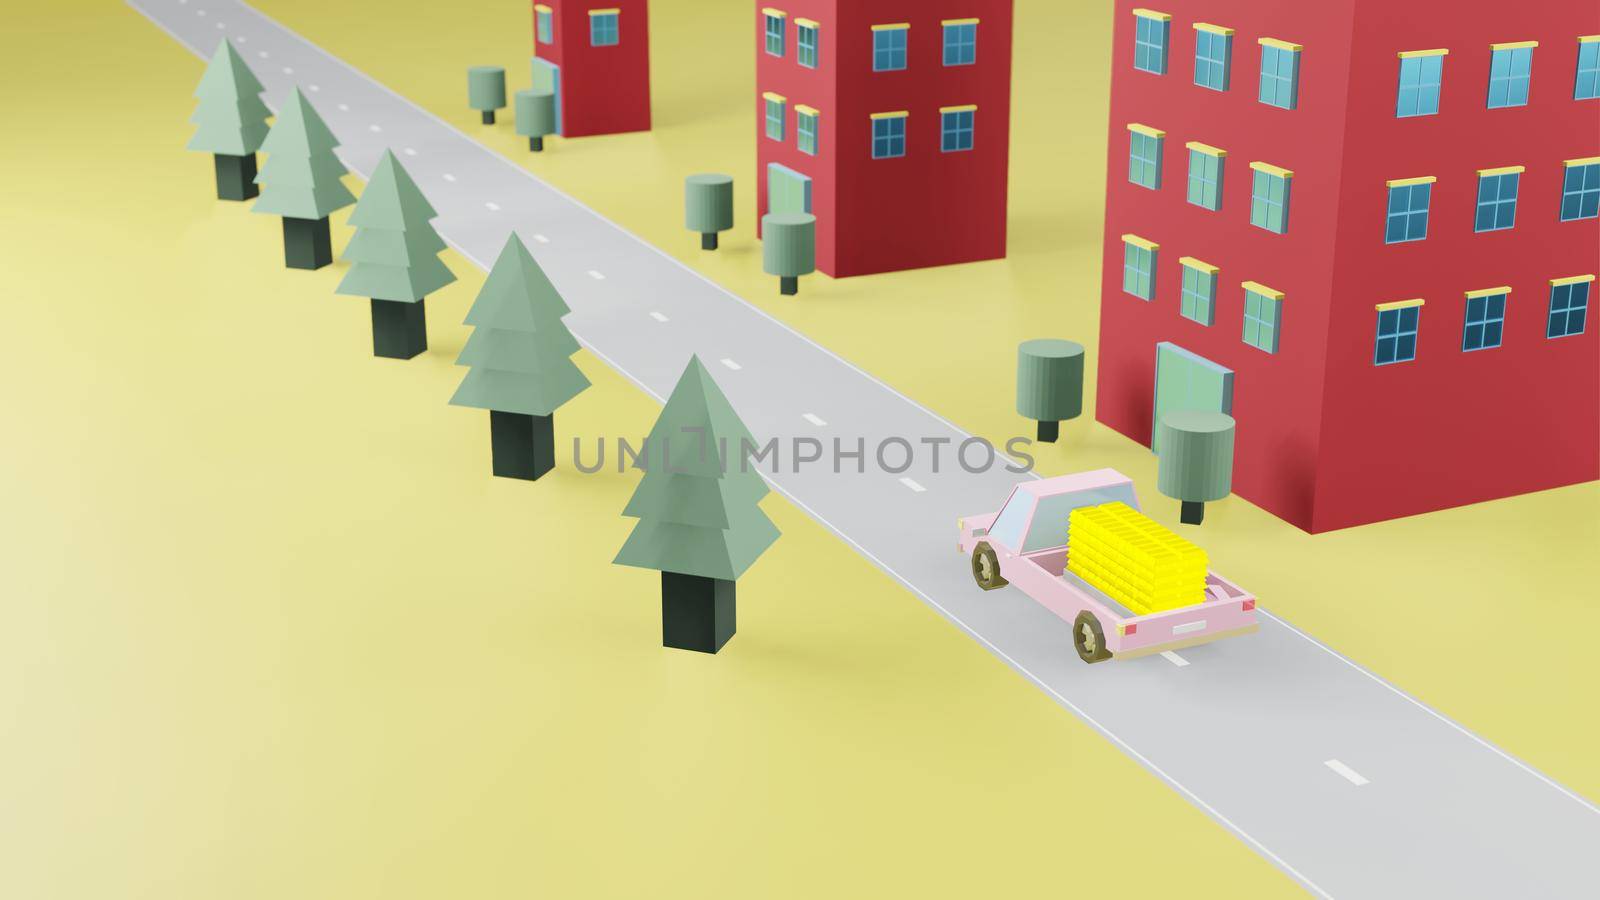 Truck transport stack fine gold bar on road have green tree on left and red building on right with yellow background and copy space 3d render.